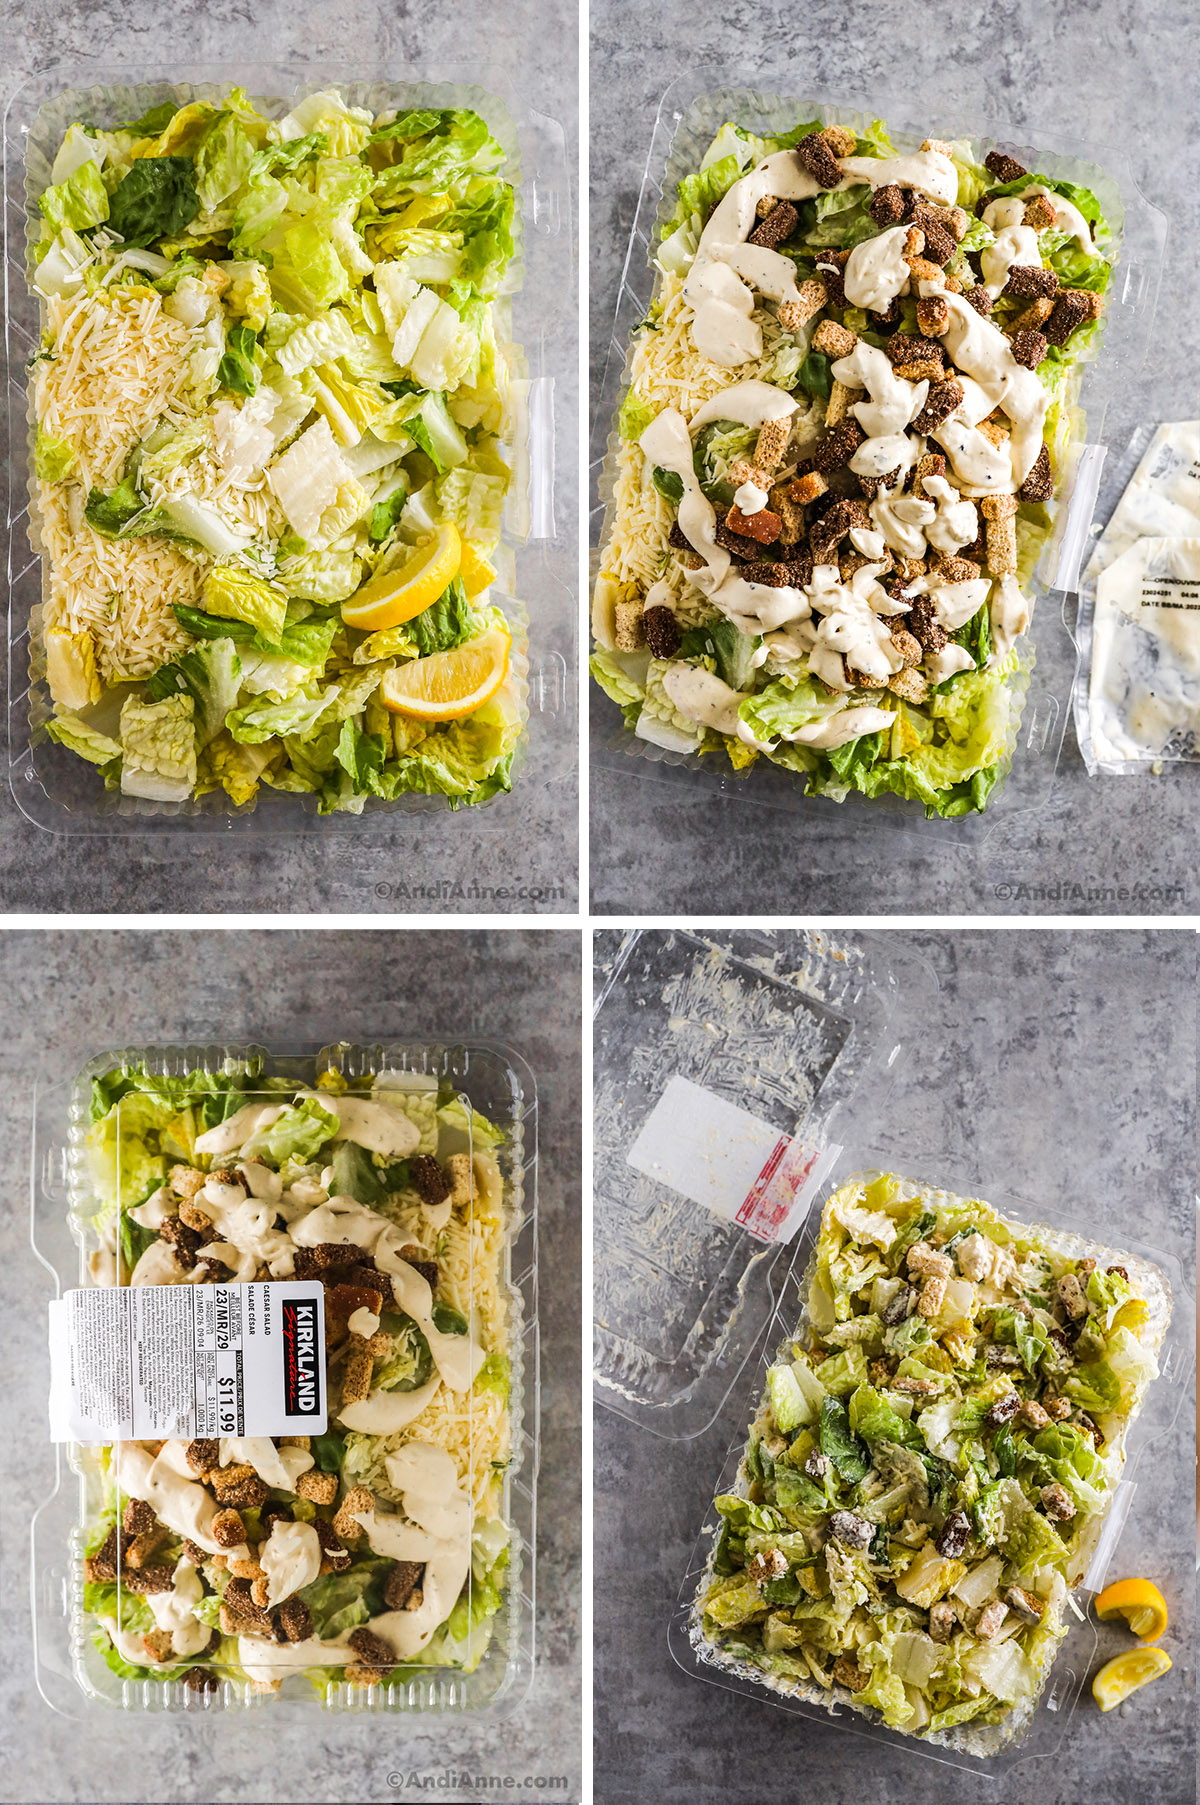 Four images showing a Costco caesar salad in a clear container in various stages. First is chopped lettuce and shredded parmesan, second is breadcrumbs and dressing dumped on top, Third is container lid closed on top, fourth is the mixed caesar salad.